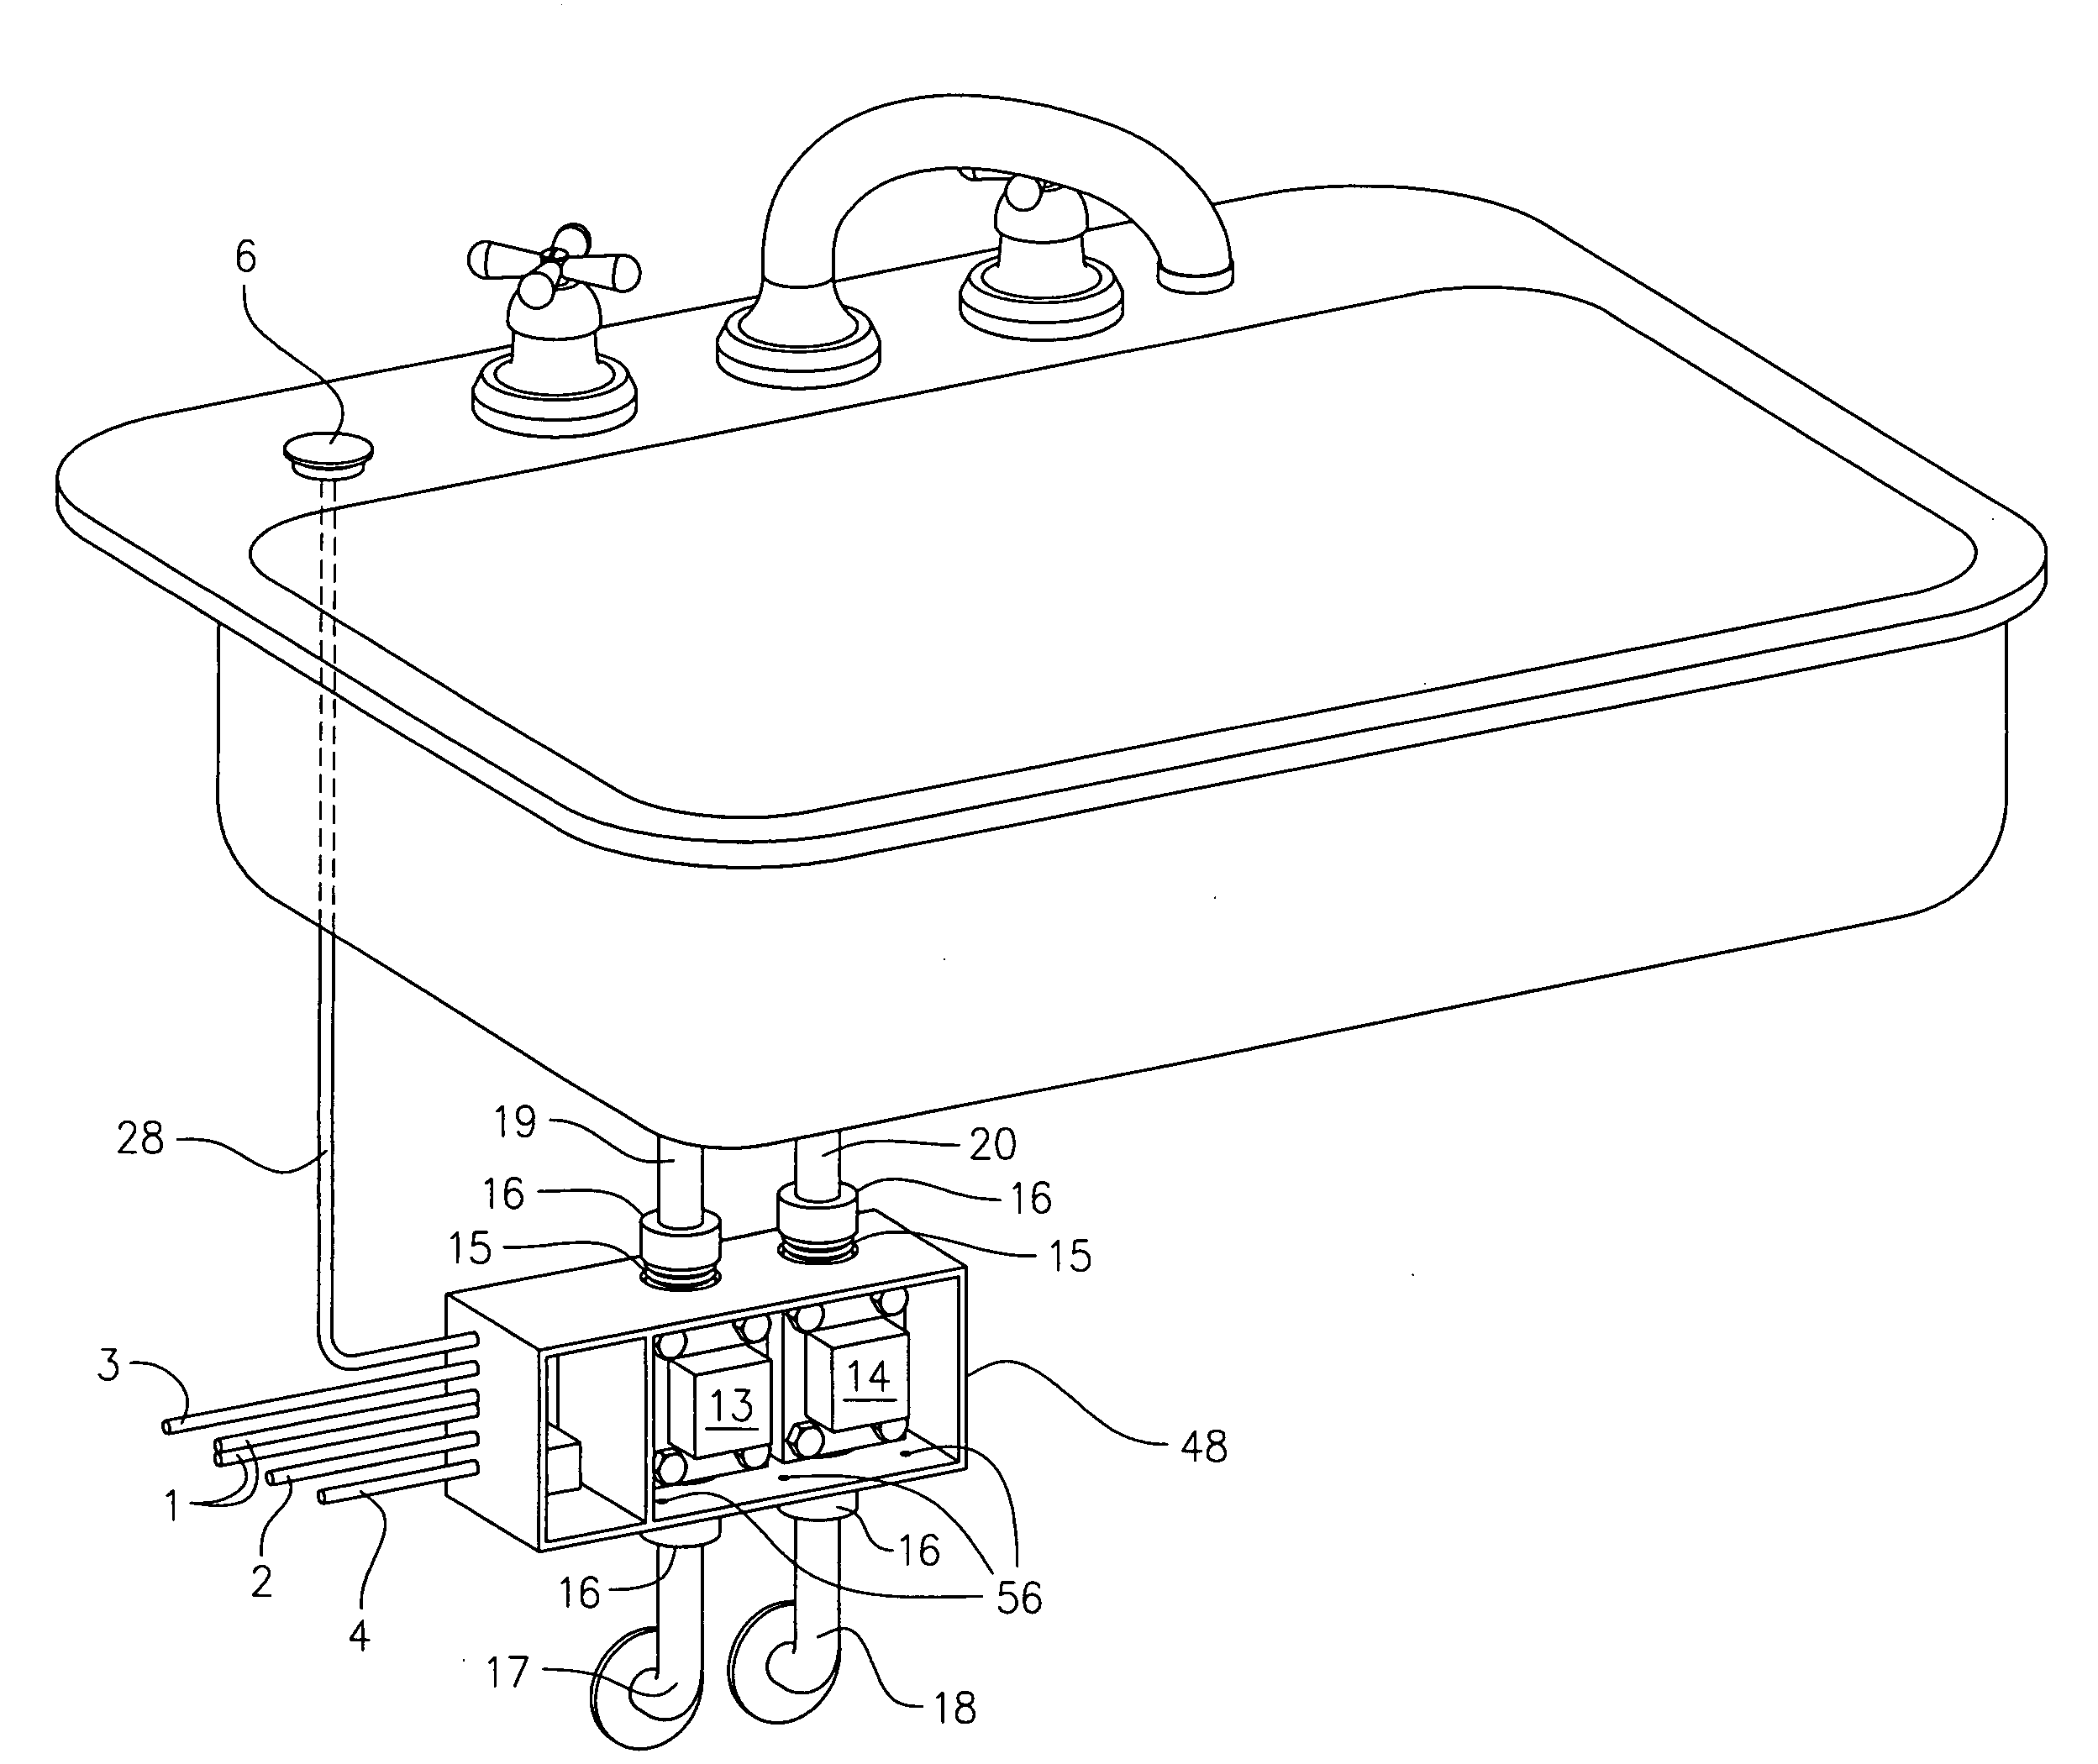 Apparatus and system for automatic activation and de-activation of water flow